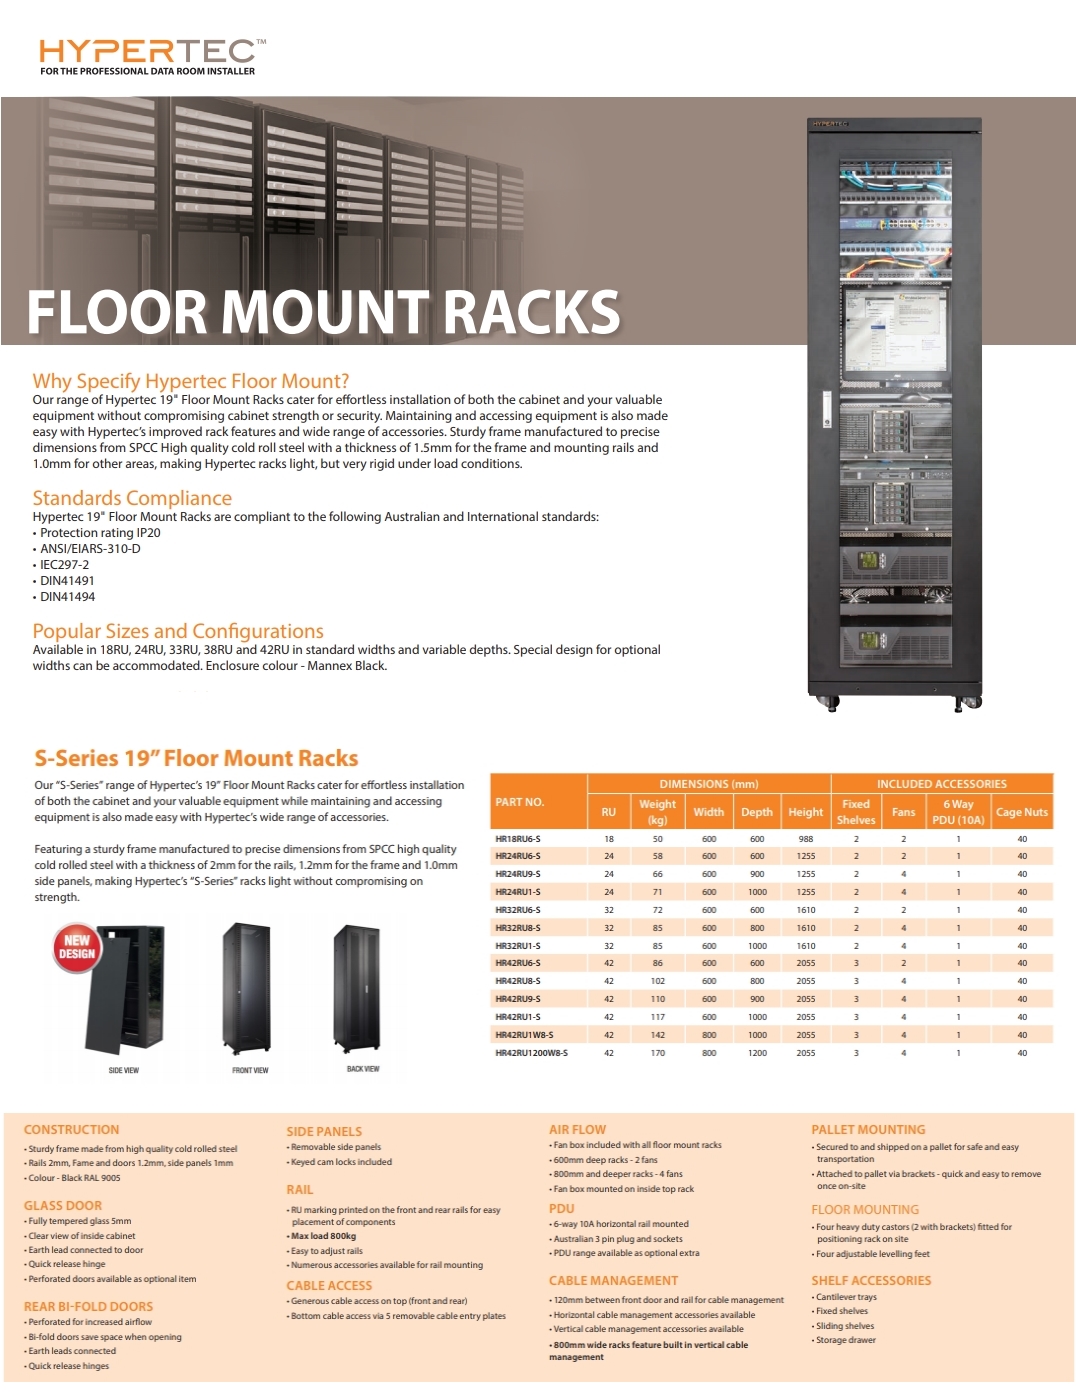 A large marketing image providing additional information about the product Hypertec Floor Mount 19" Enclosed 18RU (600W X 600D X 988H) Server Cabinet - Additional alt info not provided